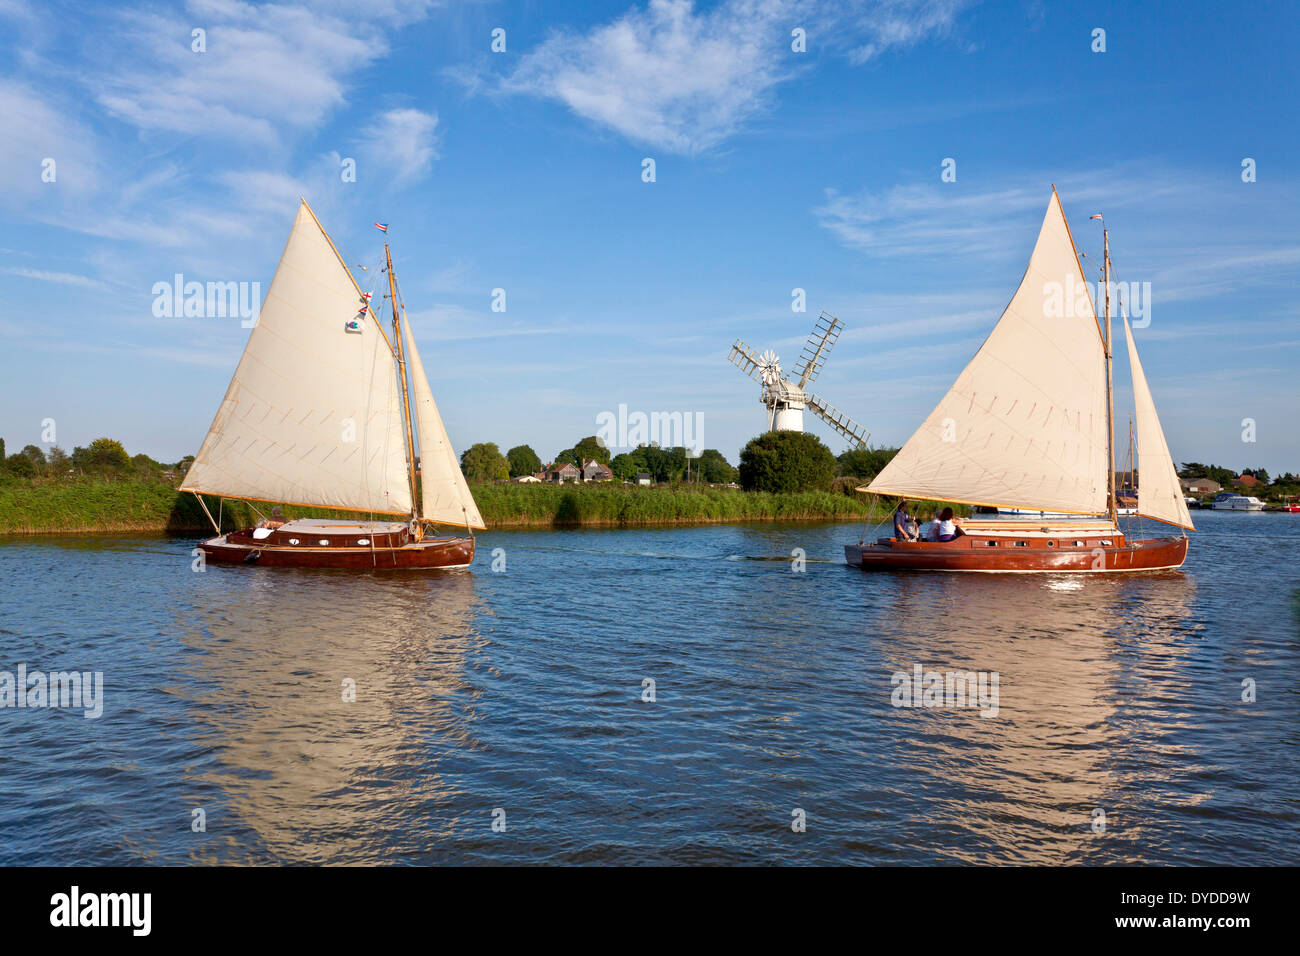 Wooden boats sail along the River Thurne. Stock Photo